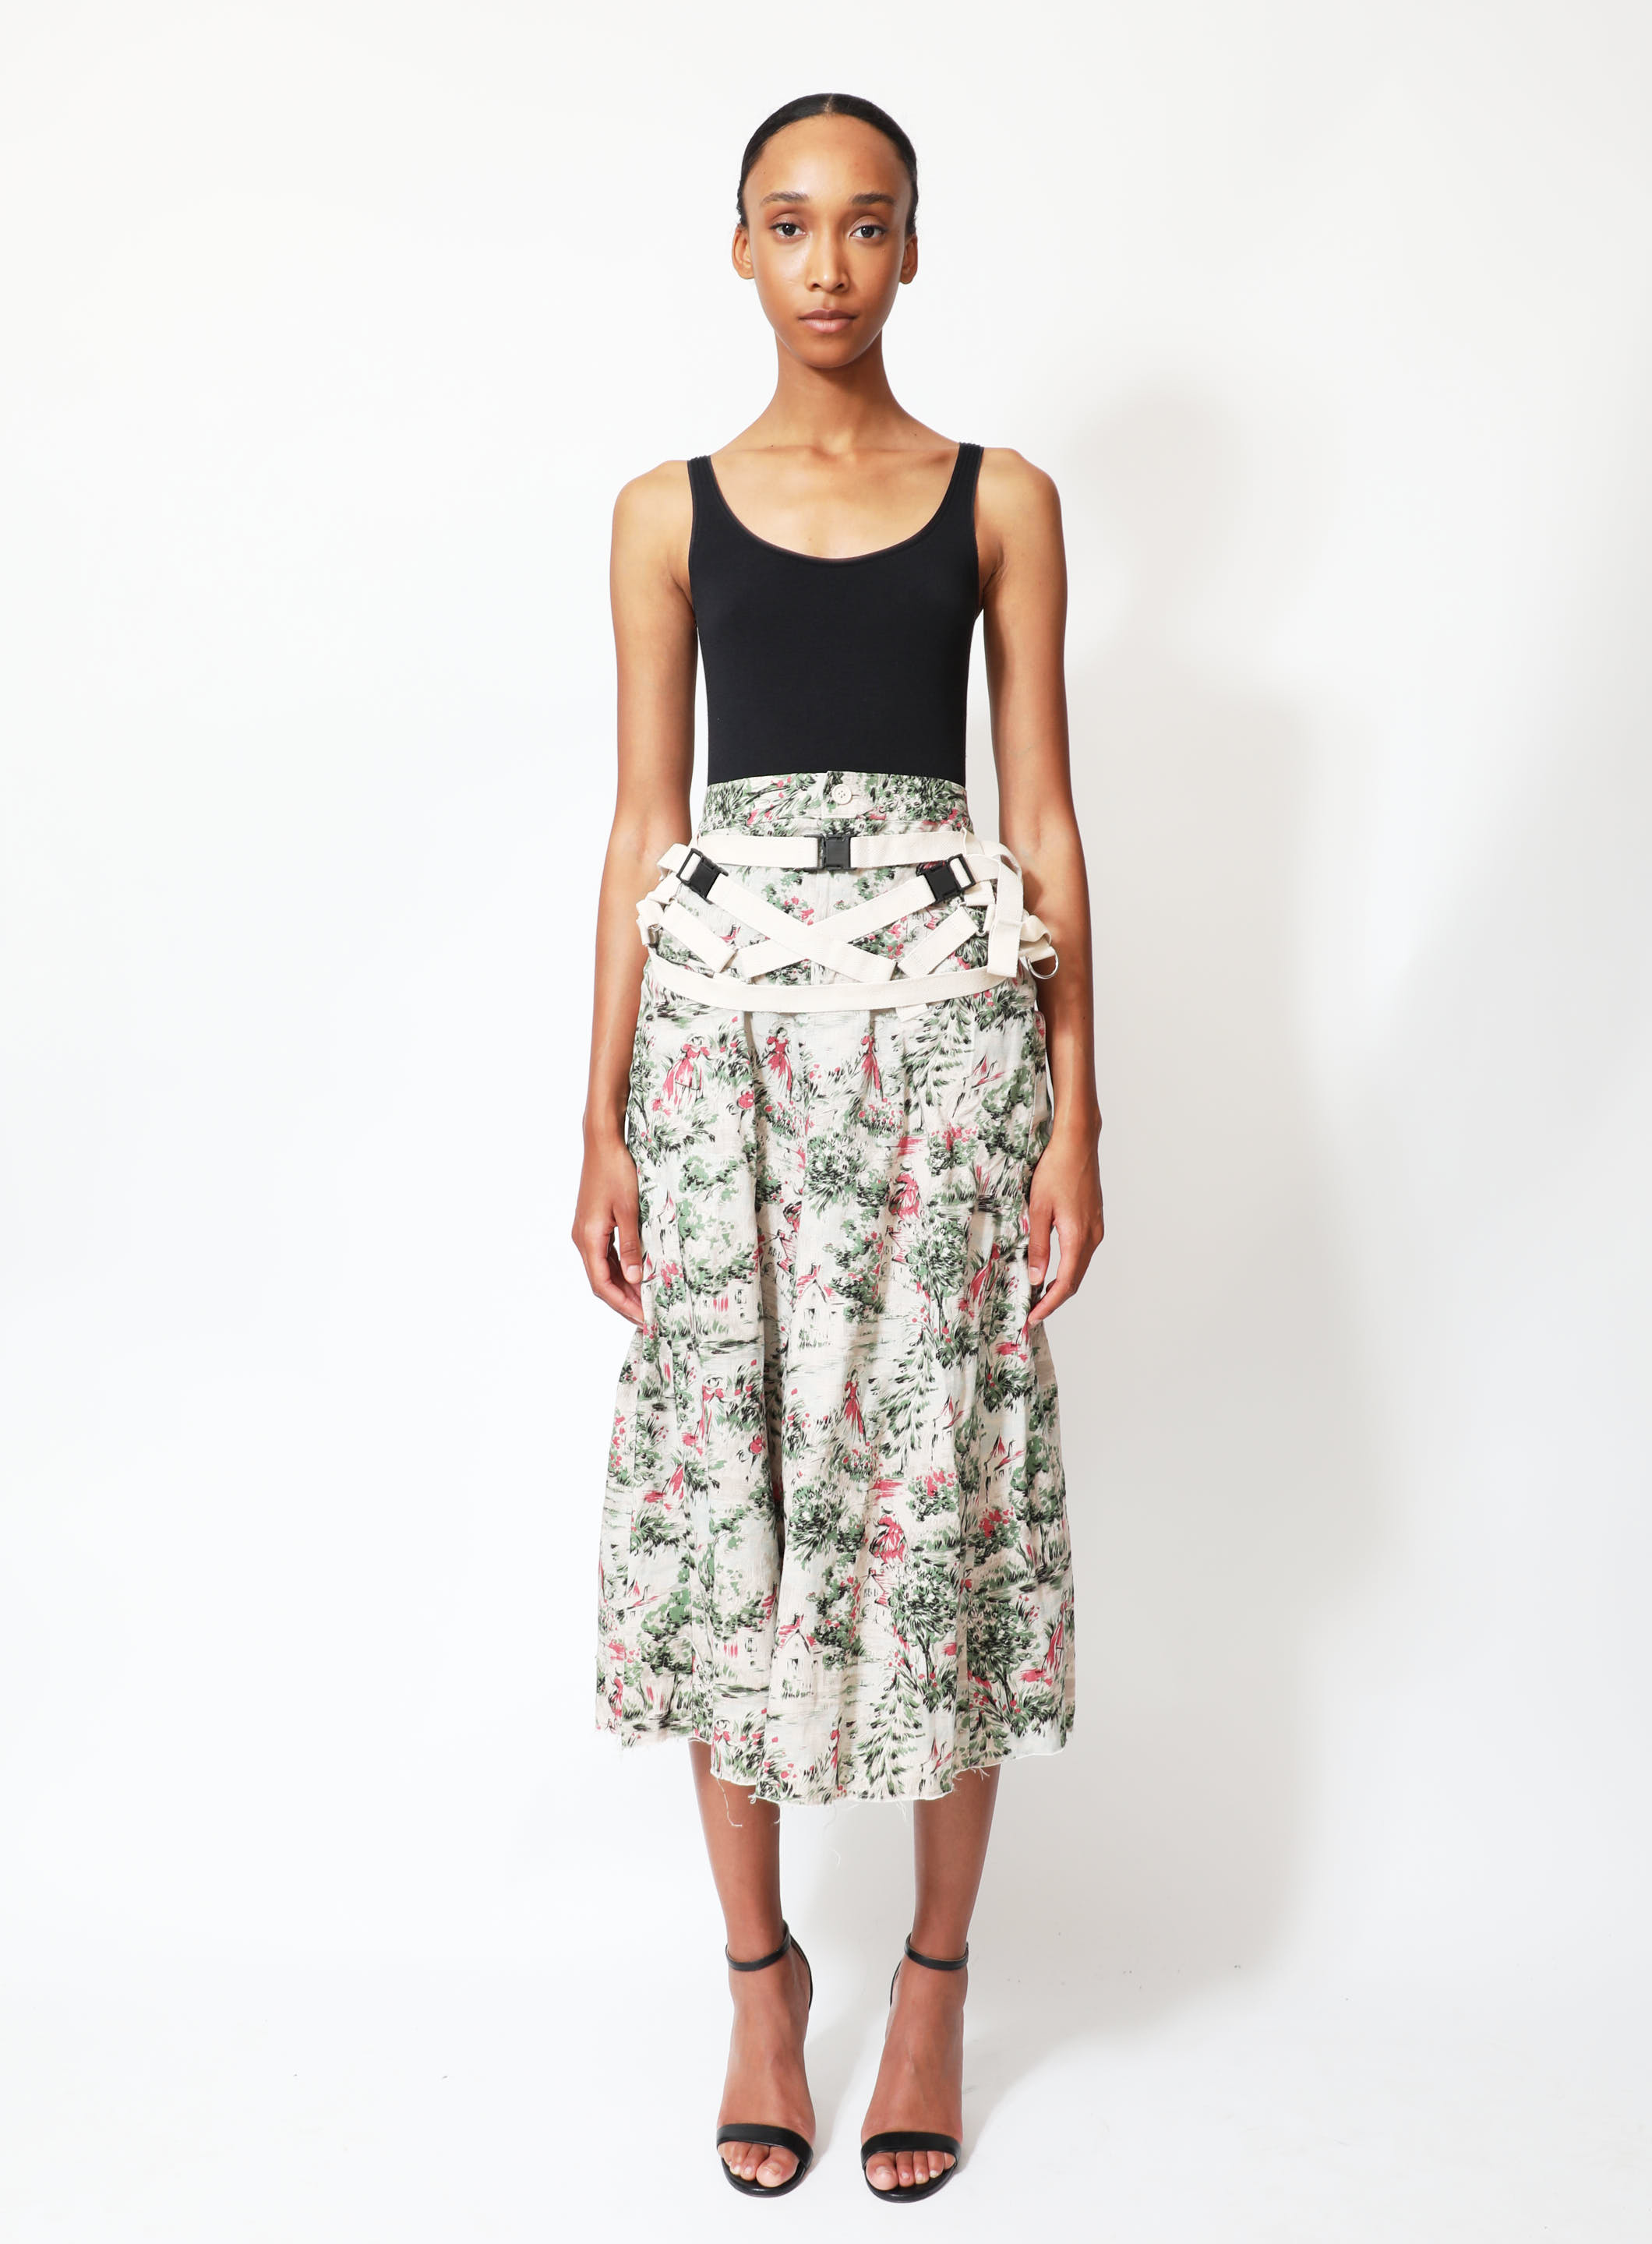 S/S 2003 Floral Buckled Linen Skirt | Authentic & Vintage | ReSEE